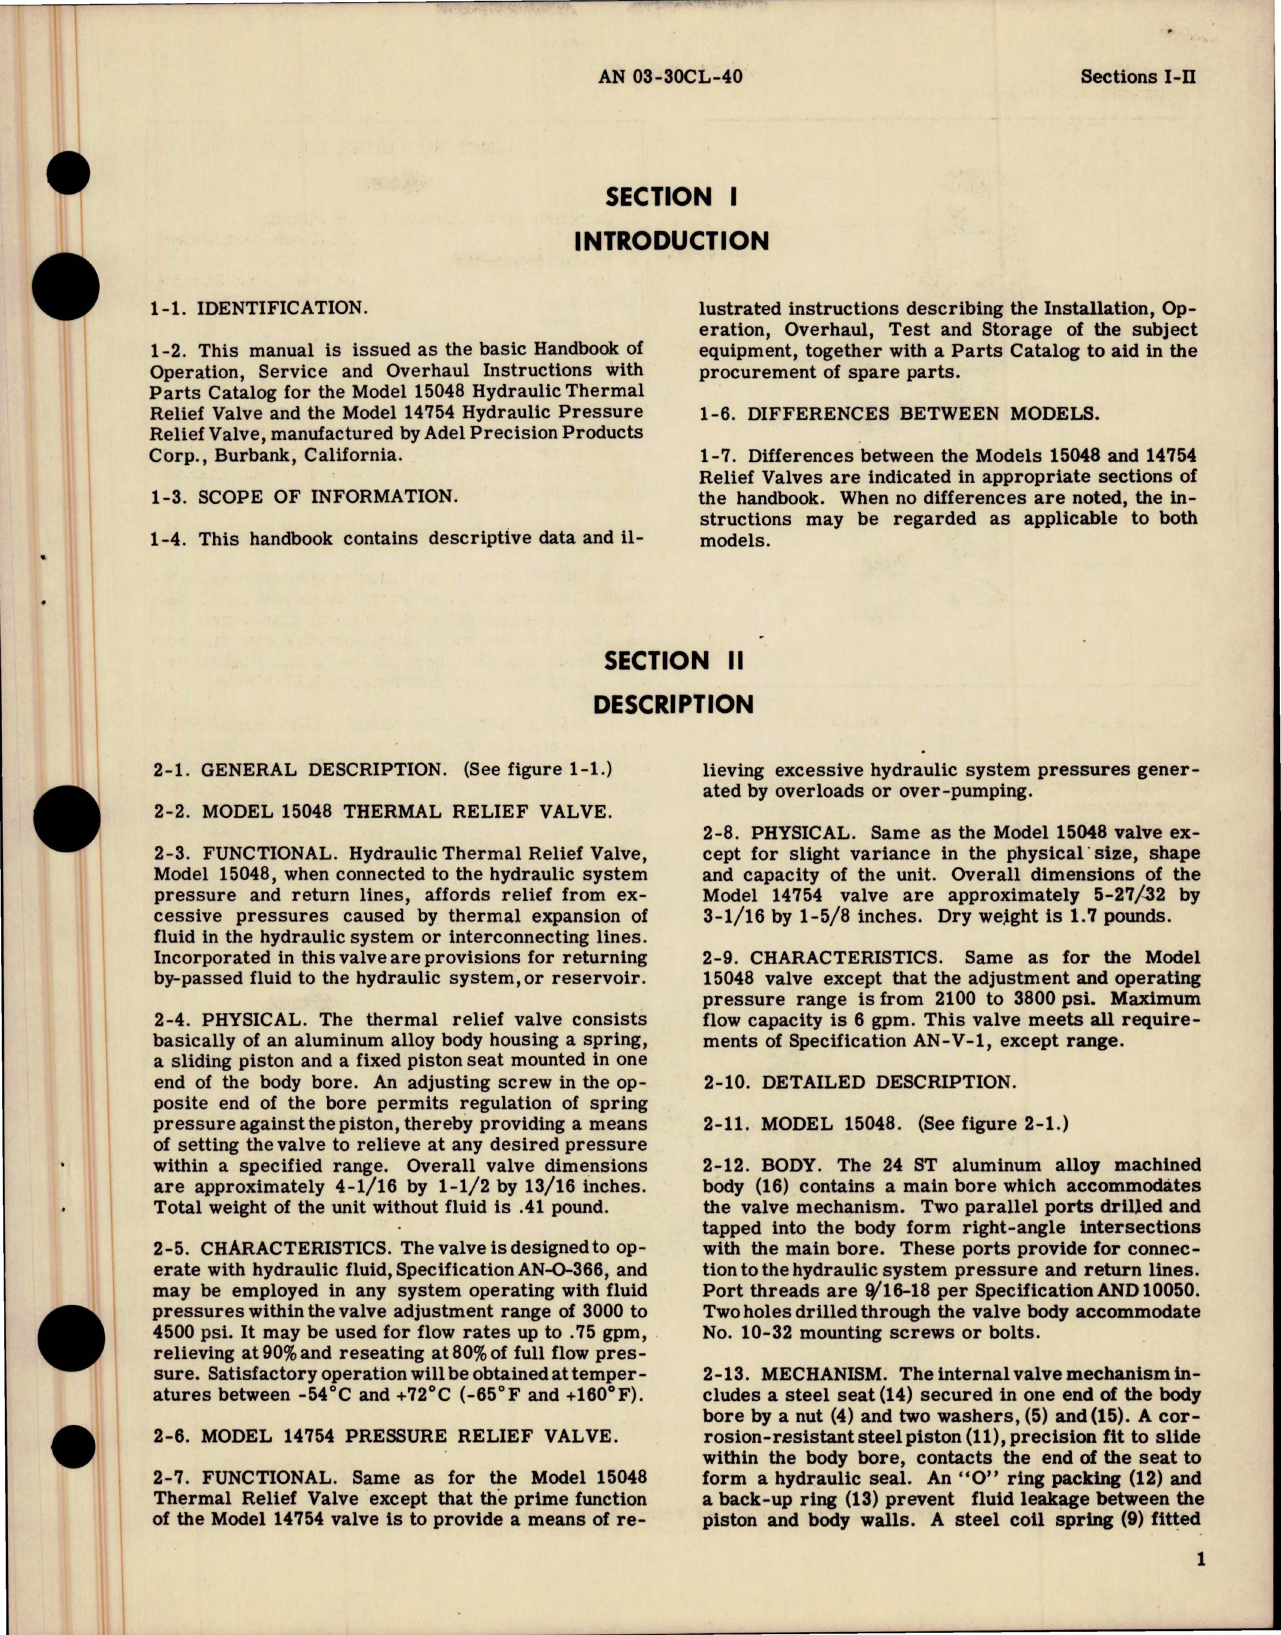 Sample page 5 from AirCorps Library document: Operation, Service, Overhaul Instructions with Parts Catalog for Hydraulic Thermal Relief Valve - 15048, and Hydraulic Pressure Relief Valve 14754